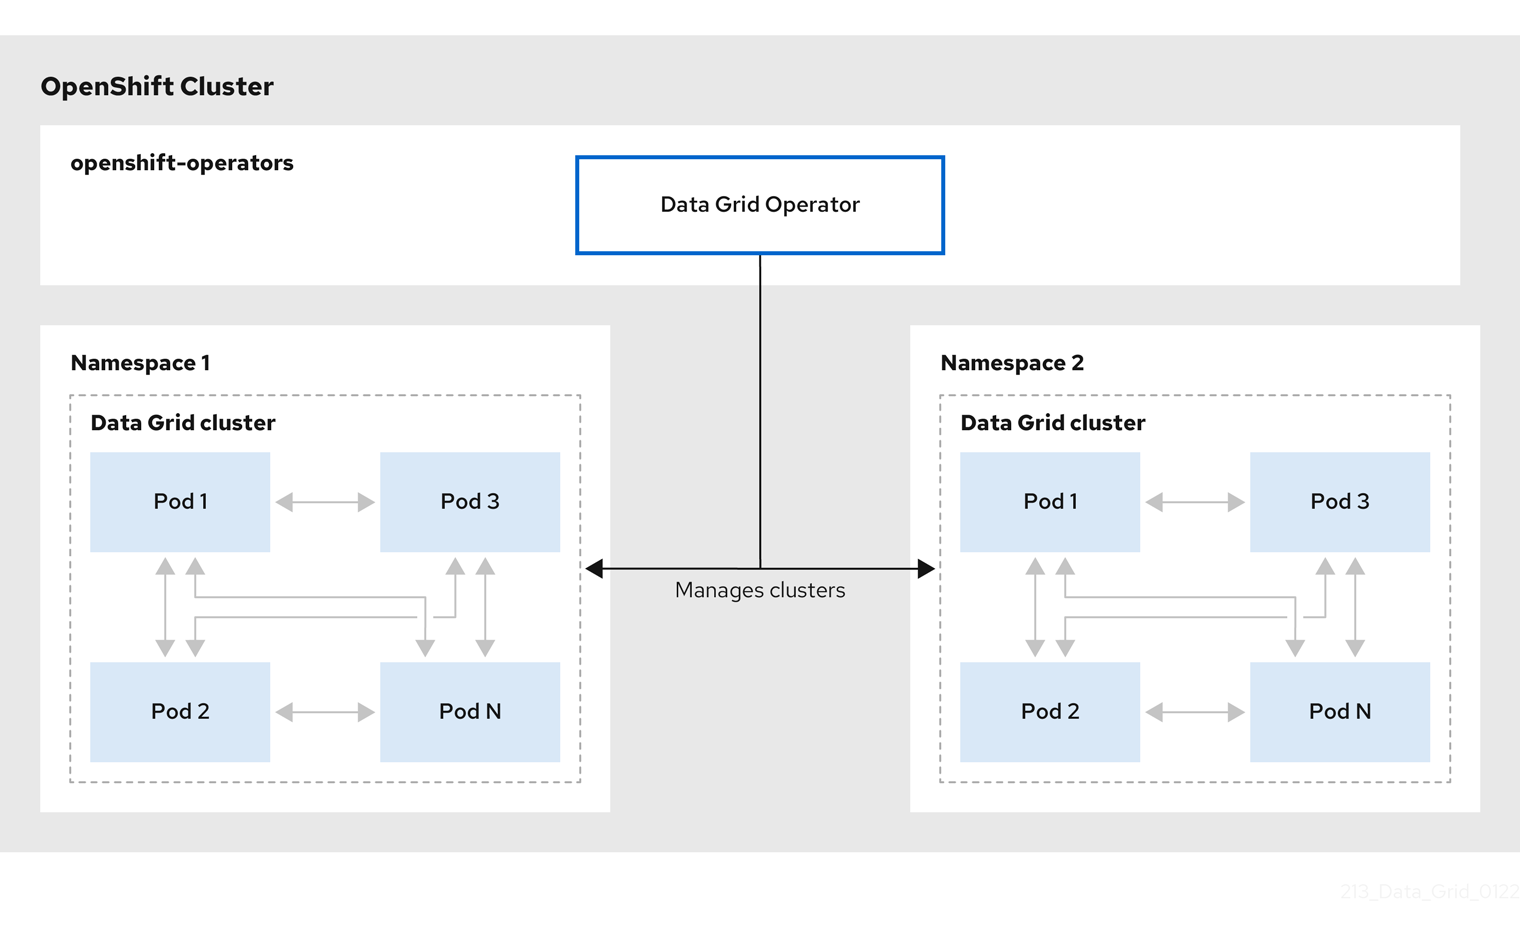 This illustration depicts how Data Grid Operator manages multiple clusters on OpenShift.